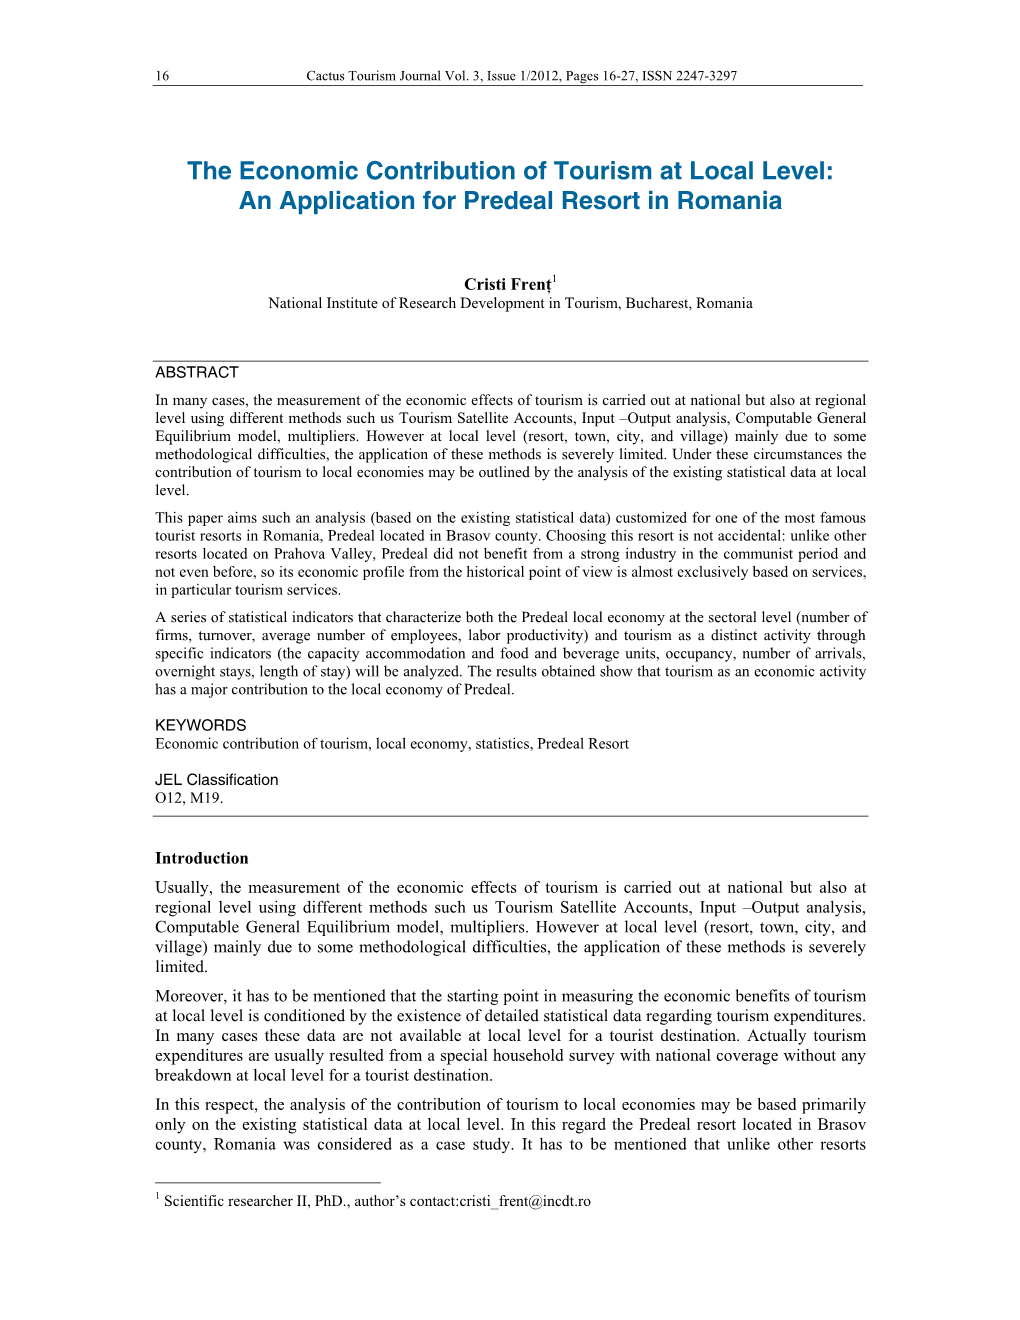 An Application for Predeal Resort in Romania